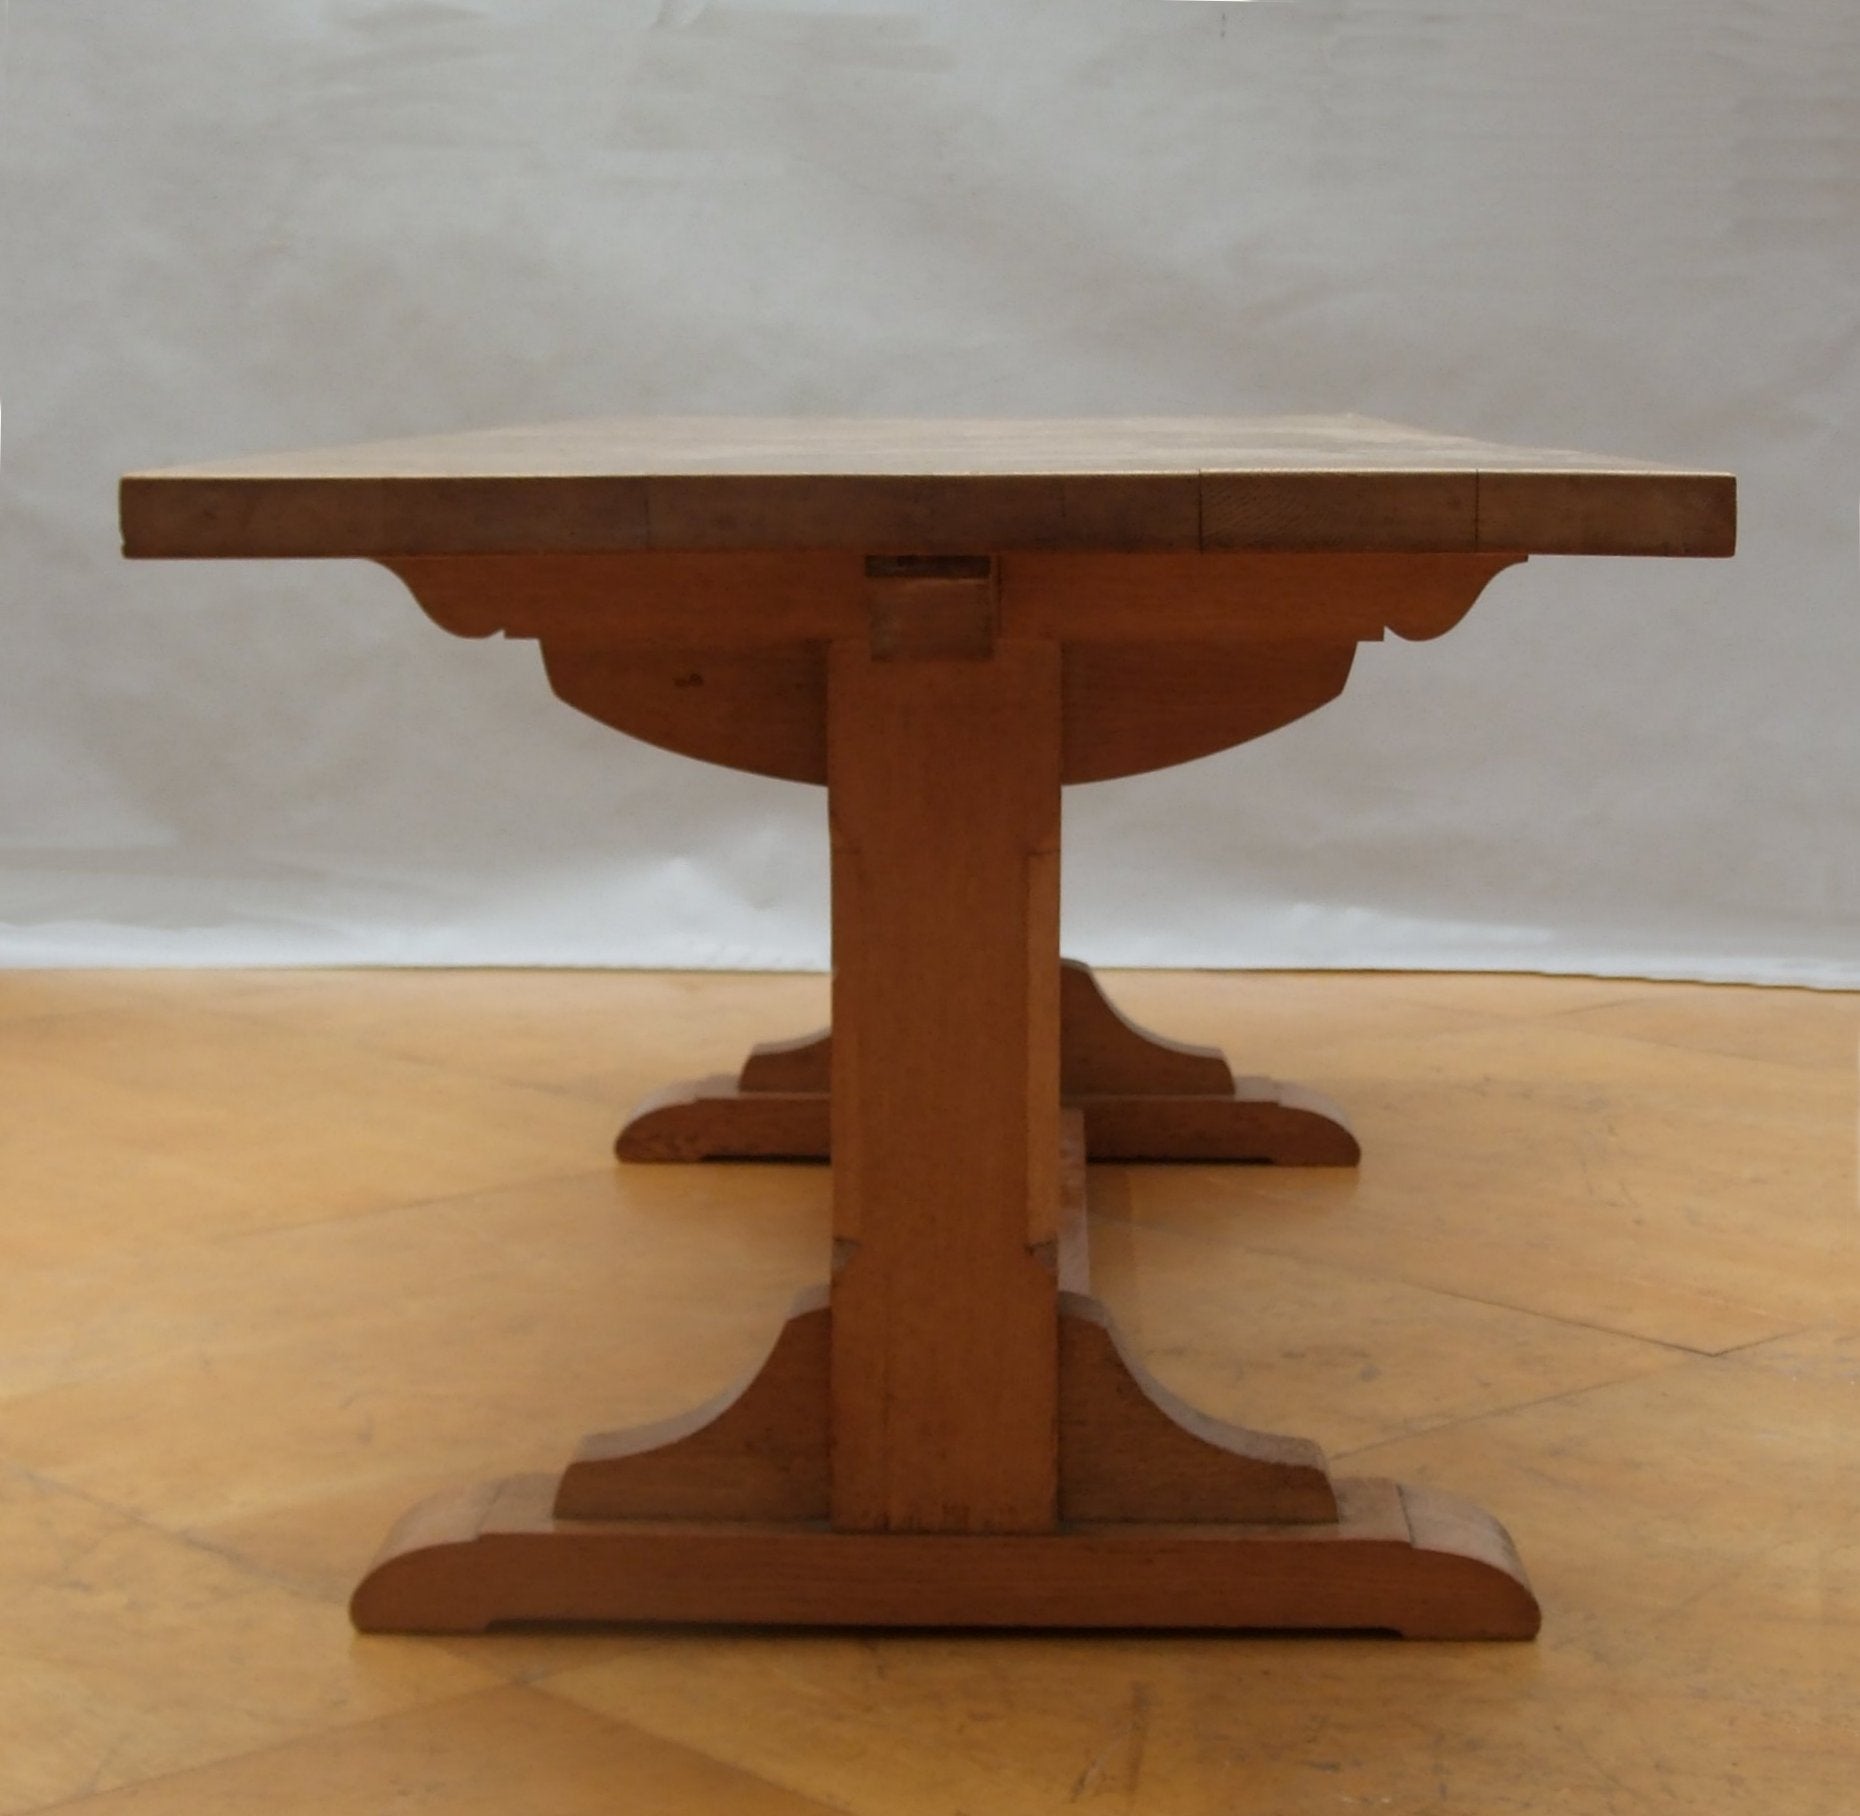 A Heals 8 Foot Dining Table The Millinery Works